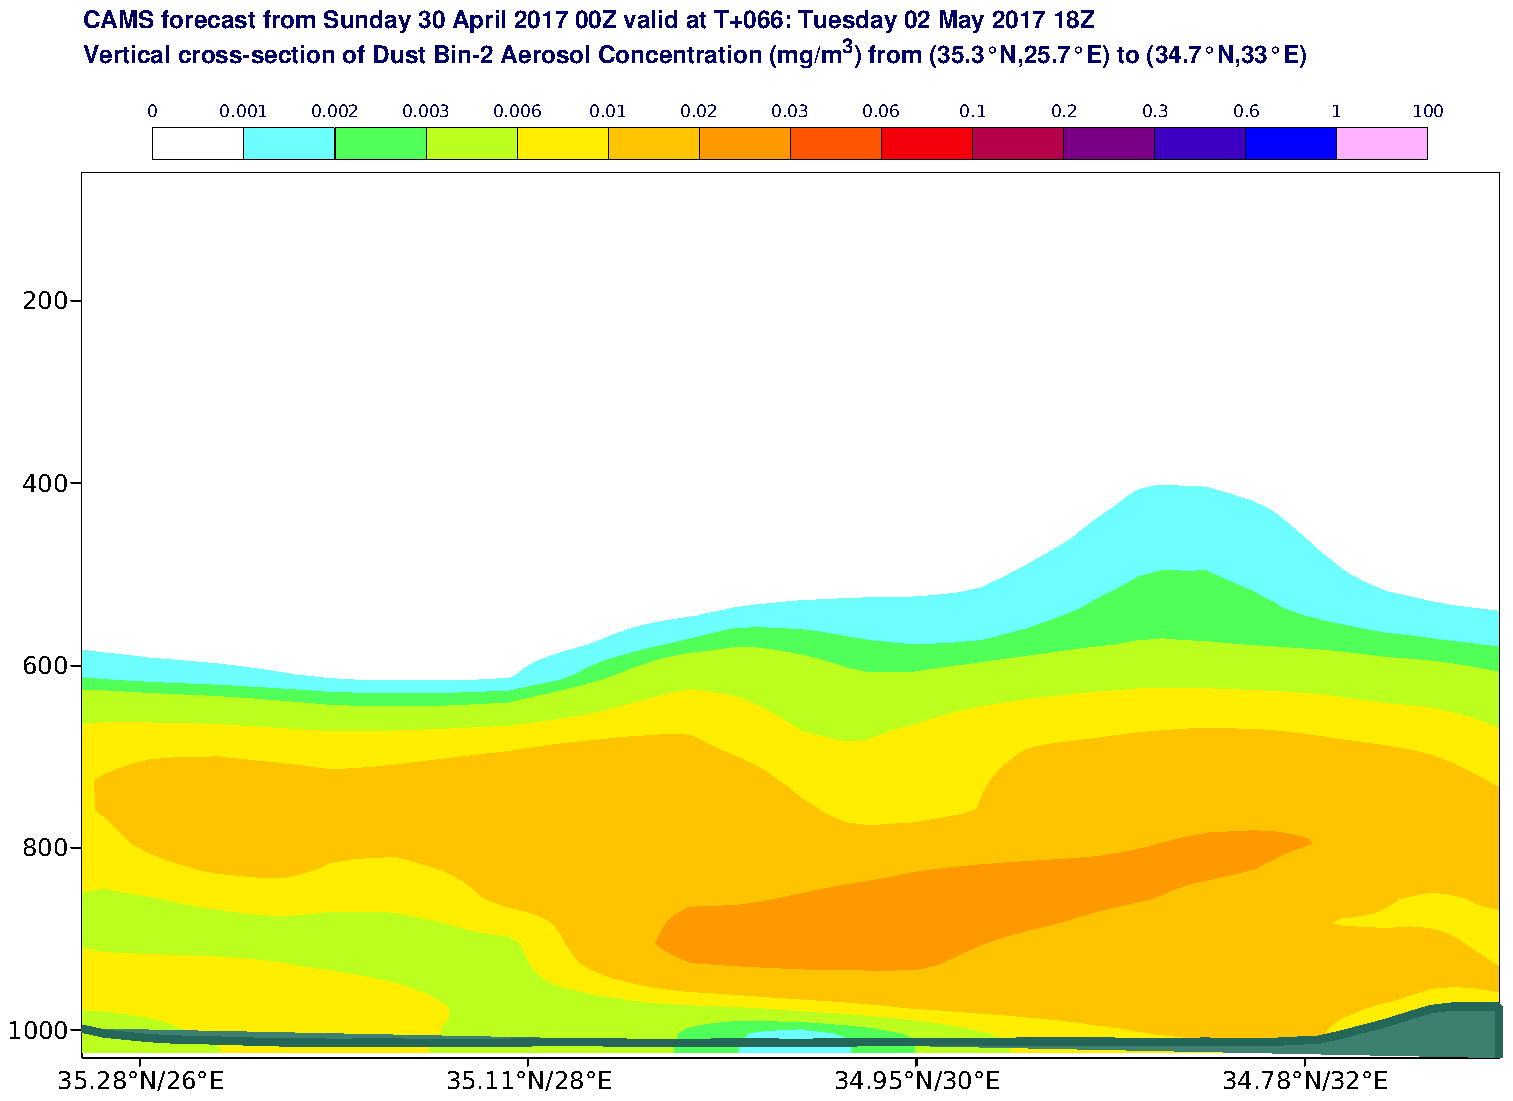 Vertical cross-section of Dust Bin-2 Aerosol Concentration (mg/m3) valid at T66 - 2017-05-02 18:00